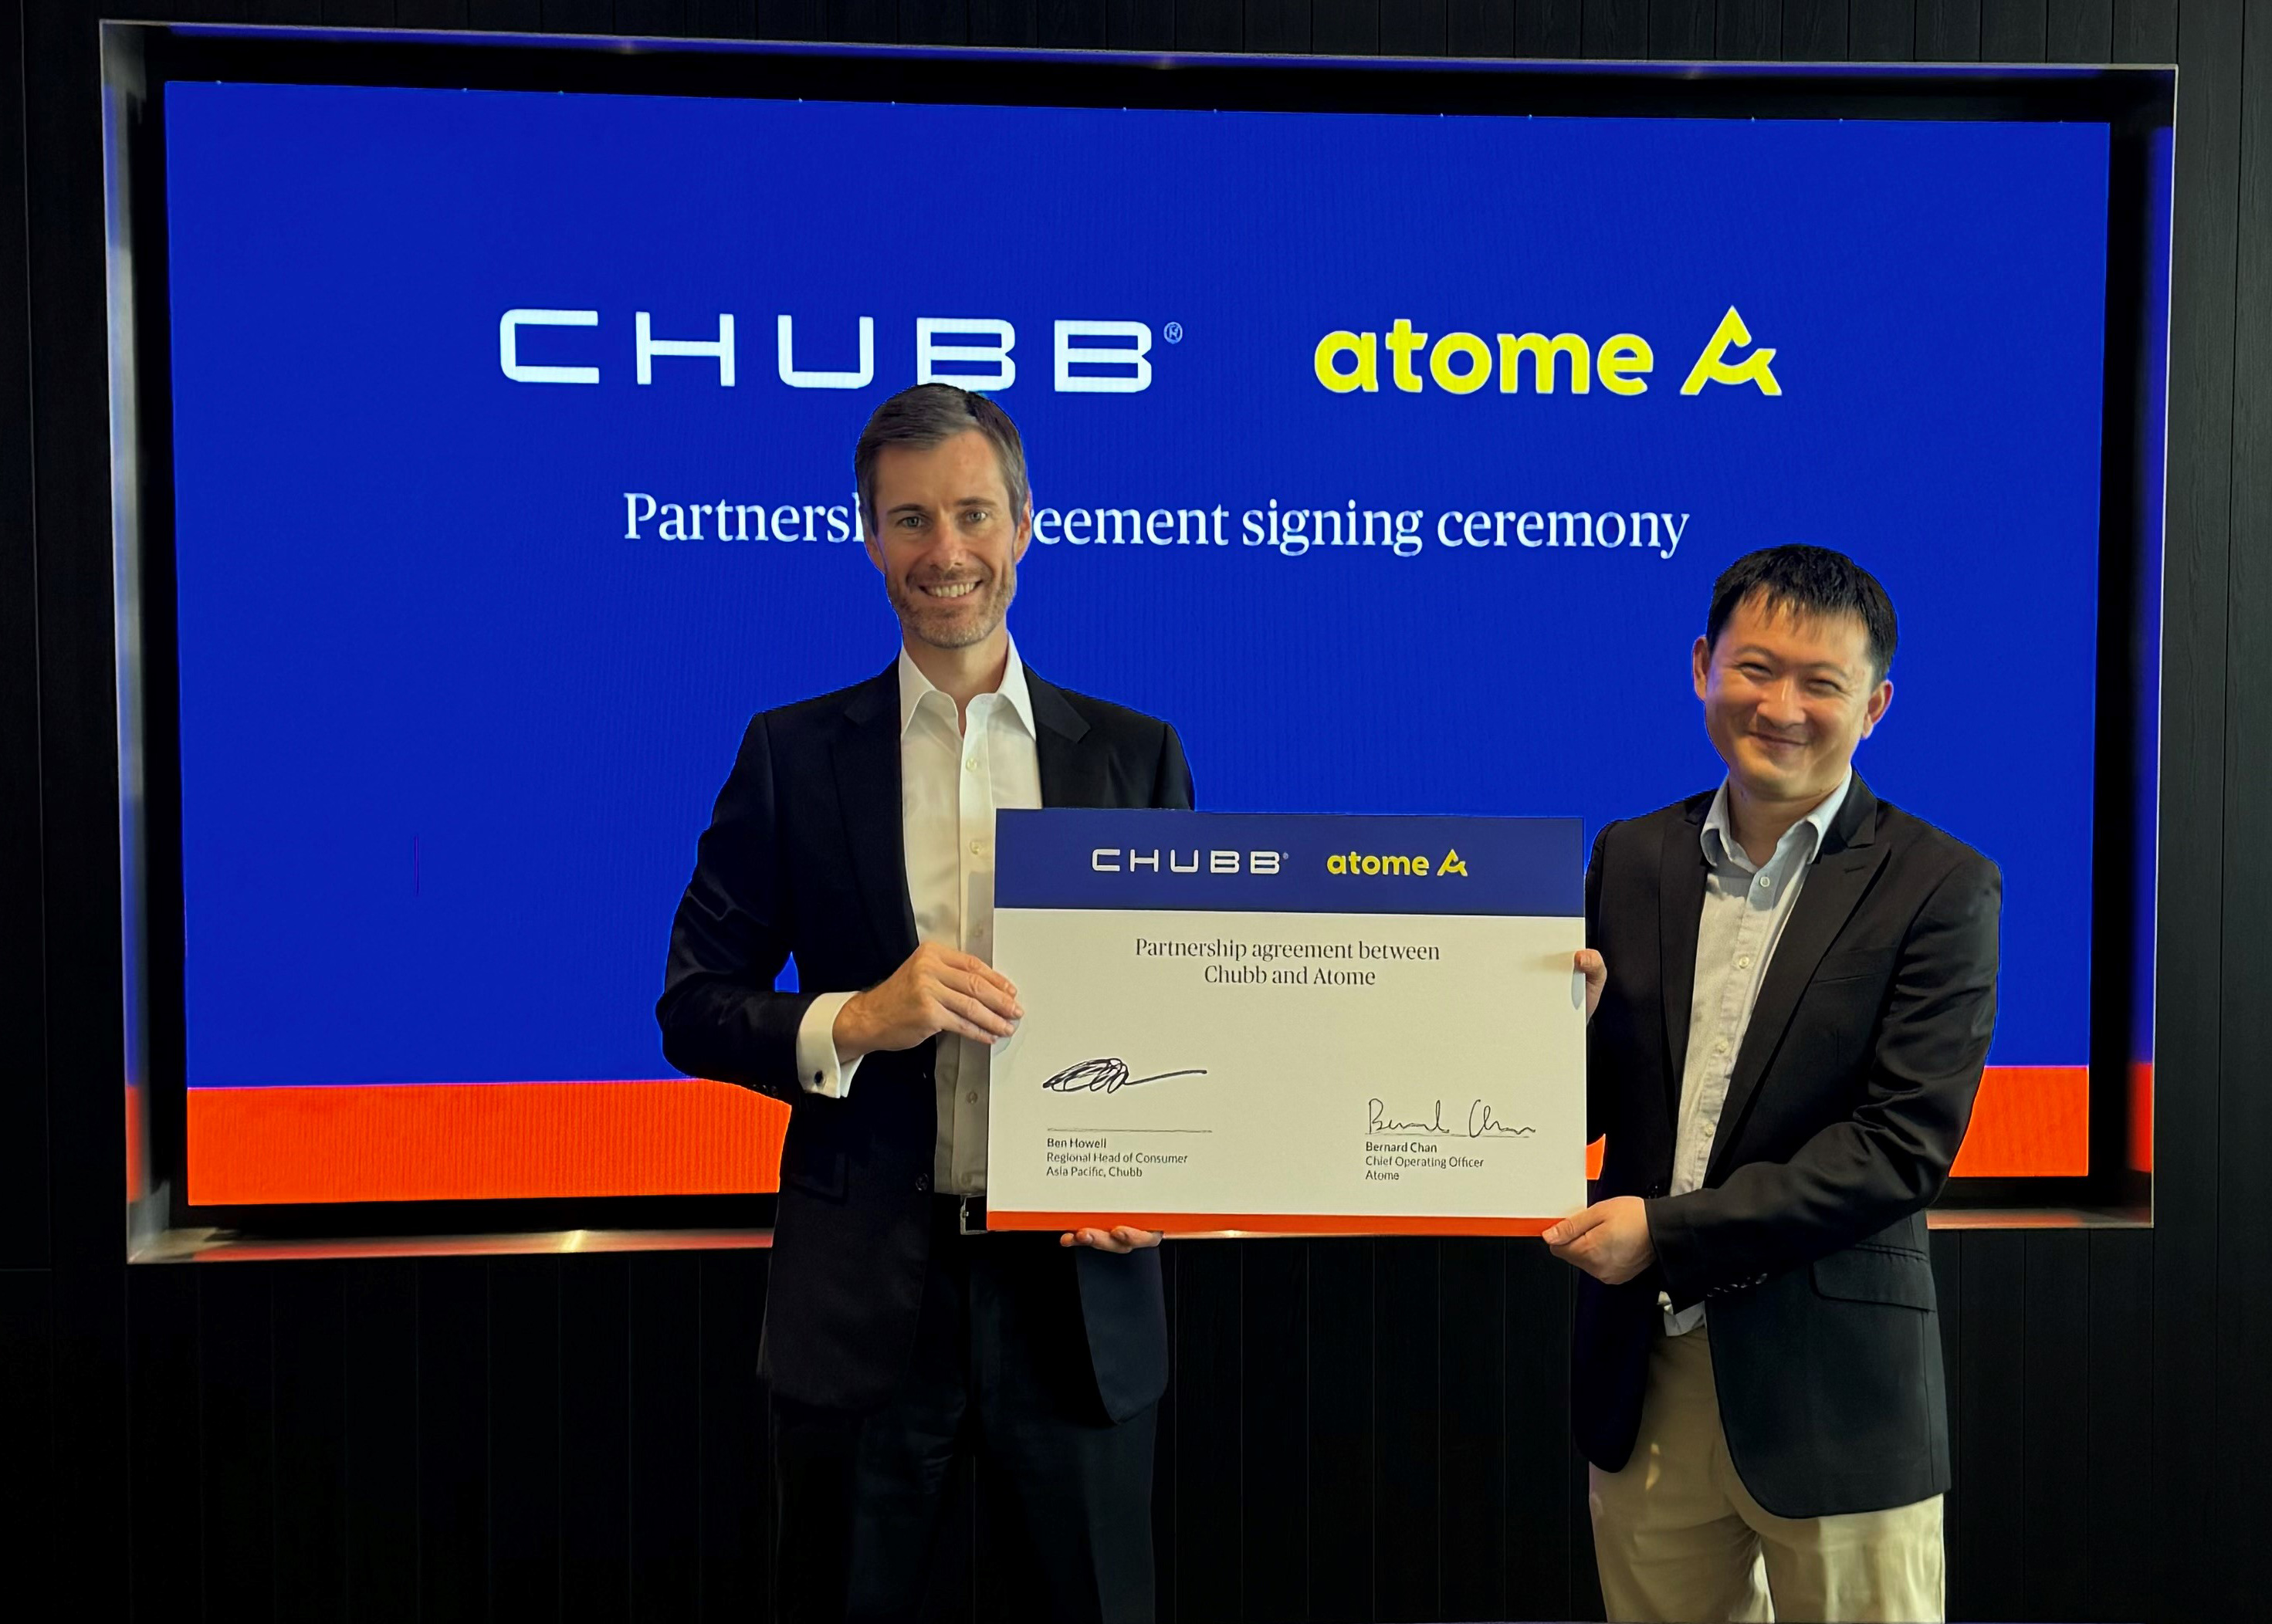 Ben Howell, Regional Head of Consumer for Asia Pacific, Chubb and Bernard Chan, Chief Operating Officer, Atome